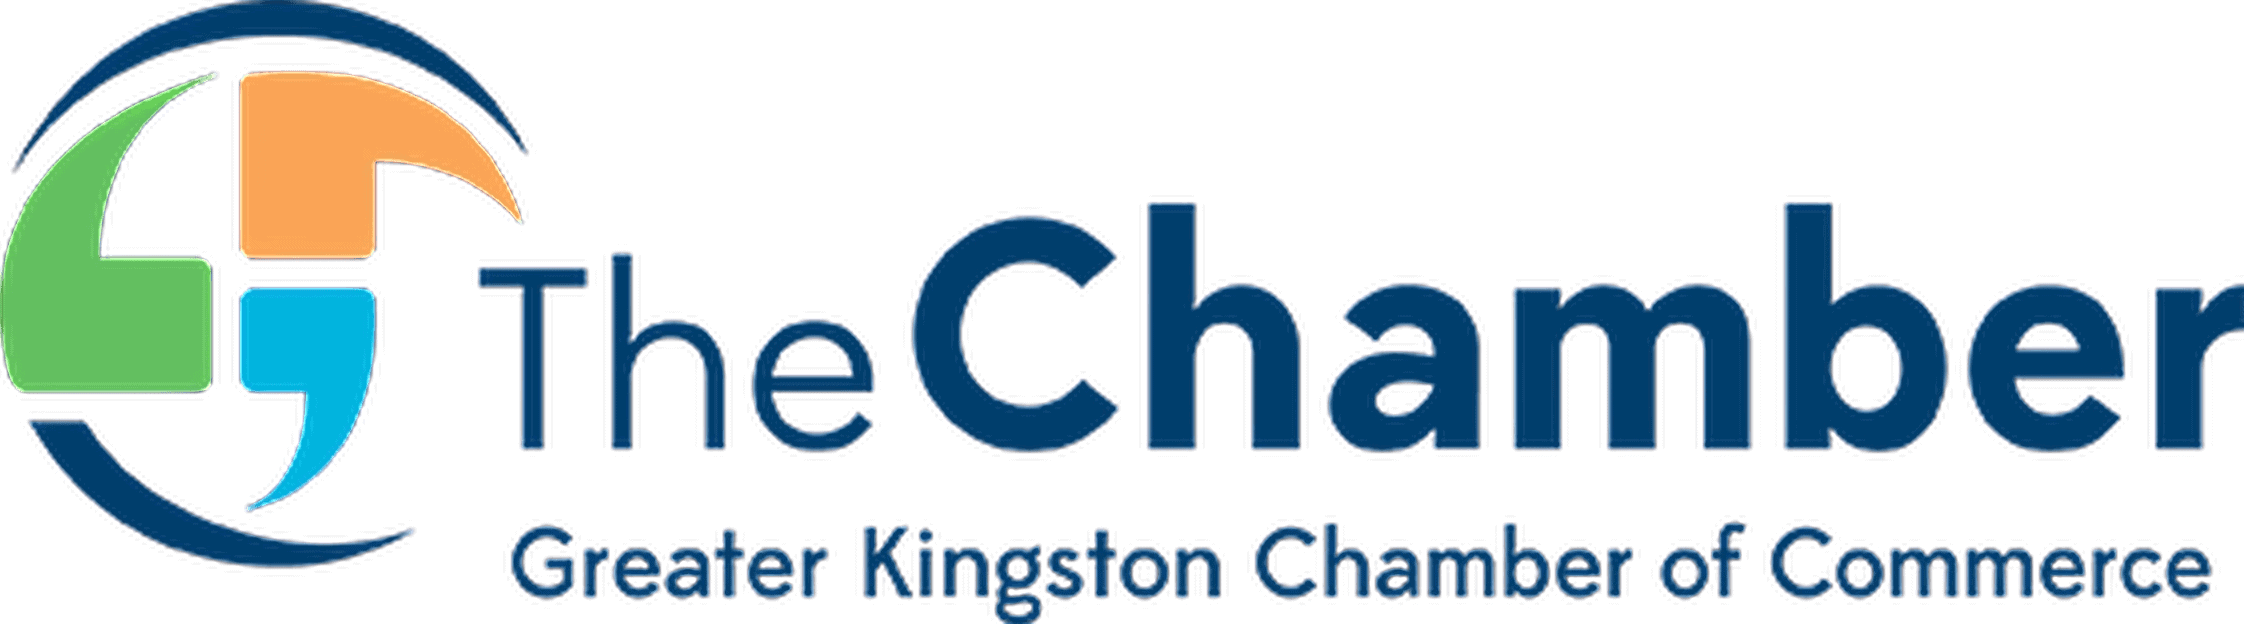 greater kingston business networking hub